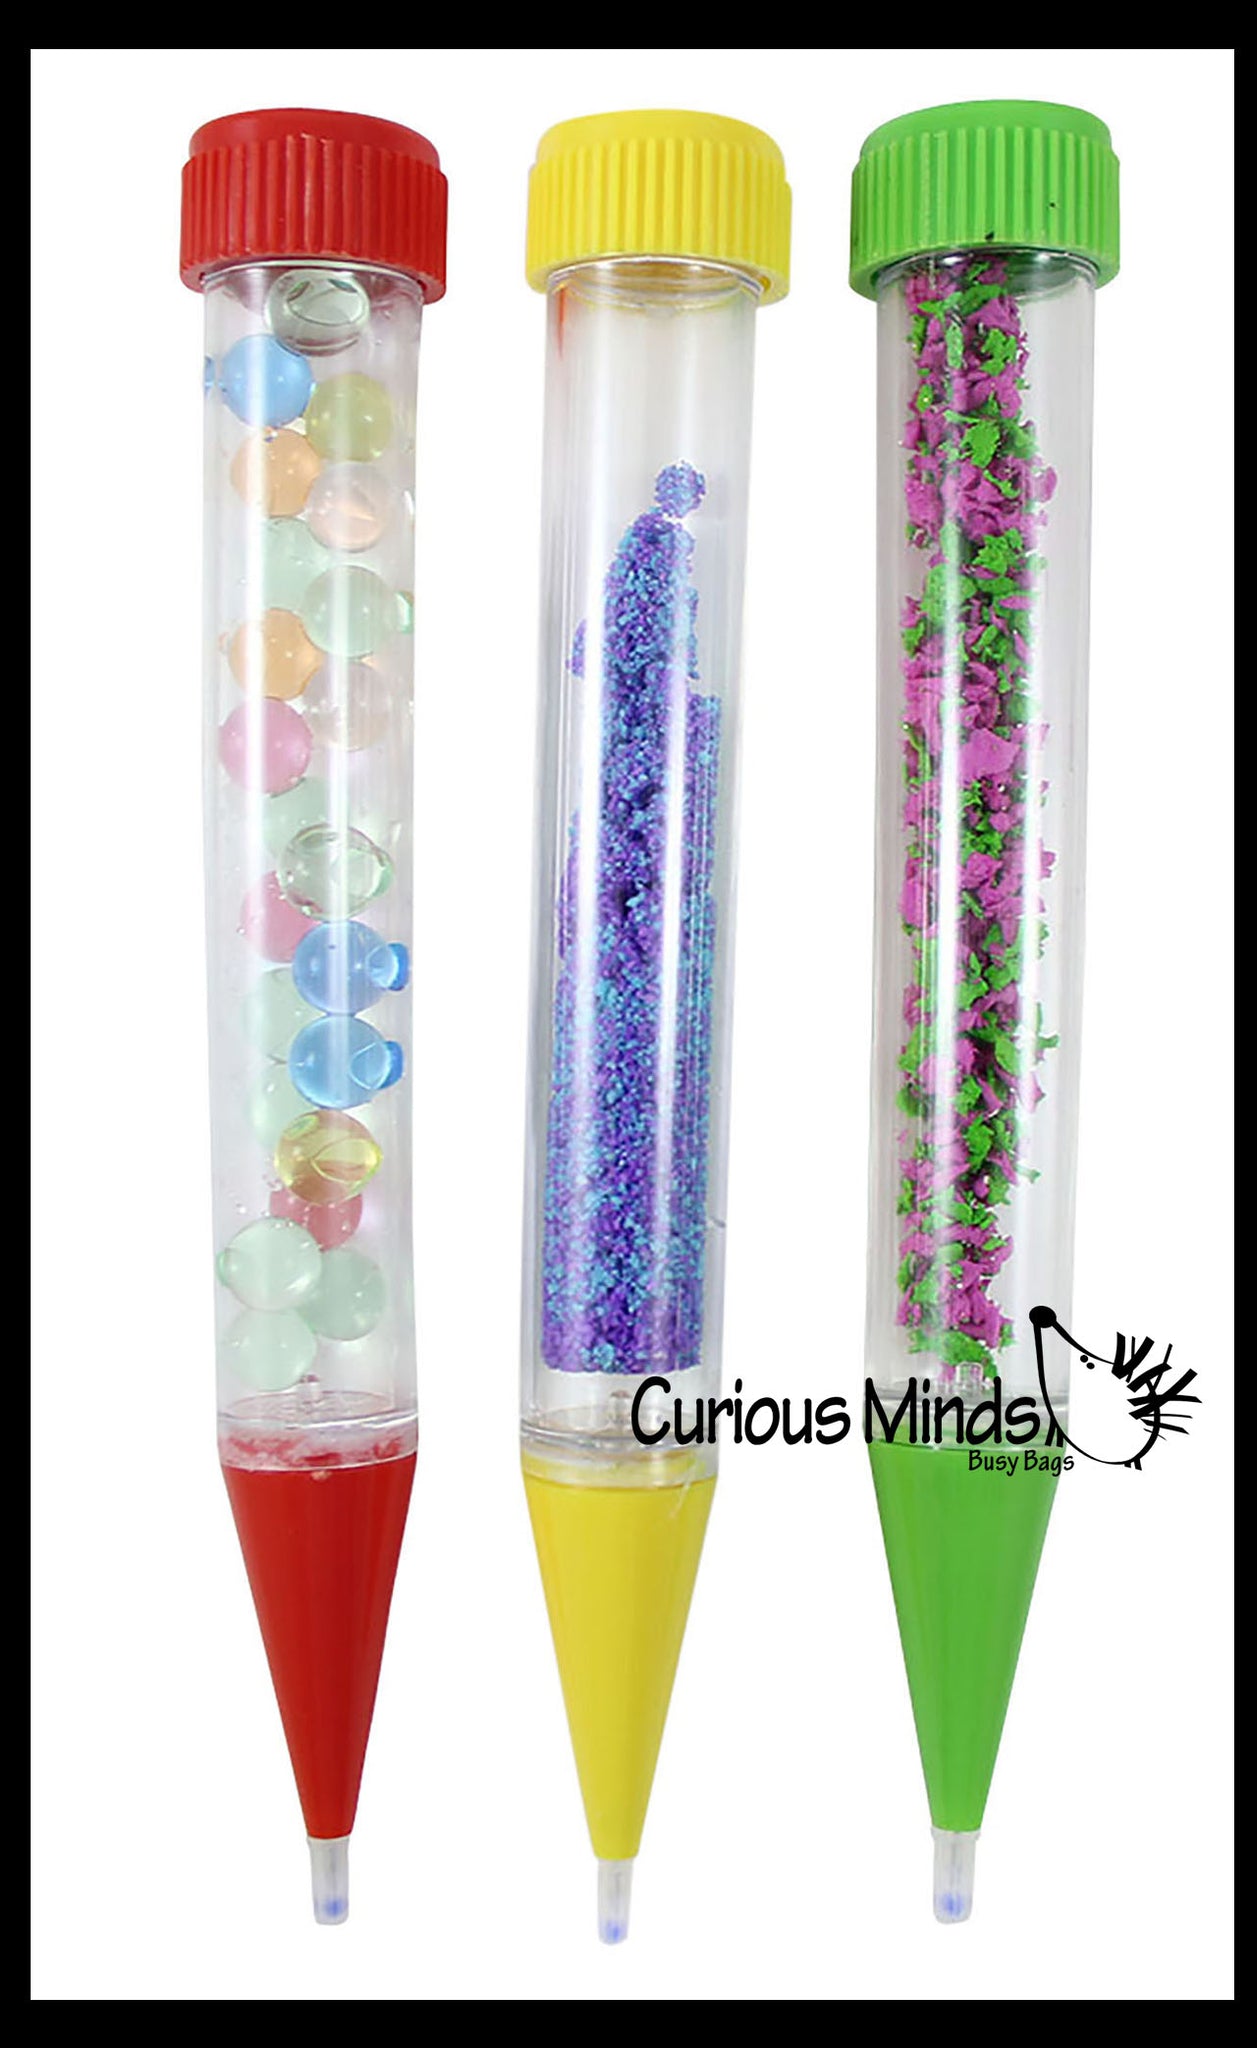 LAST CHANCE - LIMITED STOCK - Bundle of Fun Pens with Different